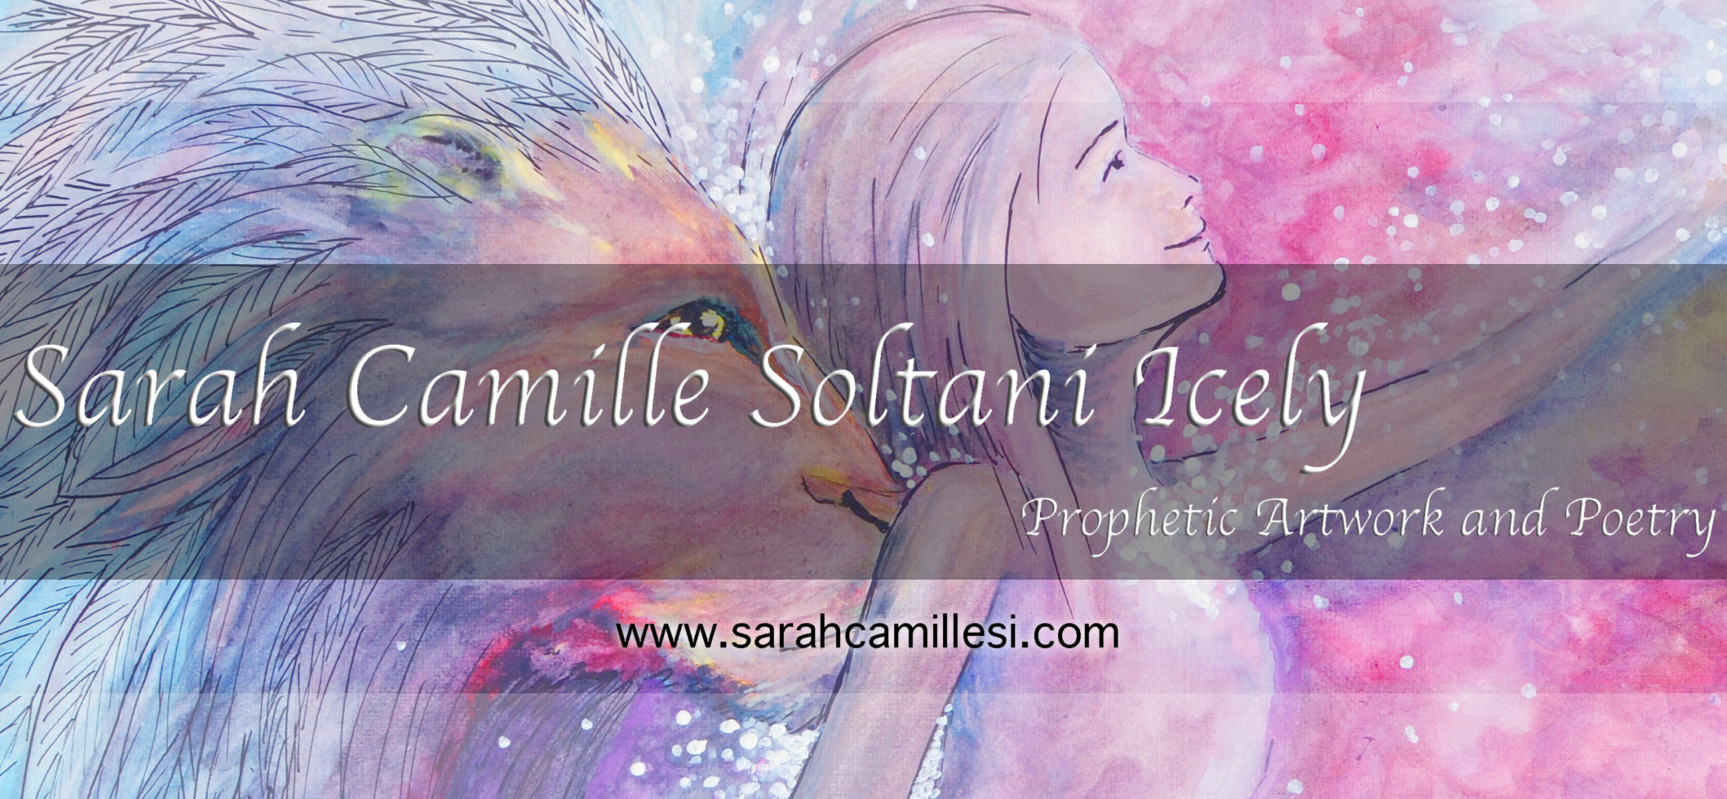 Sarah Camille Soltani Icely